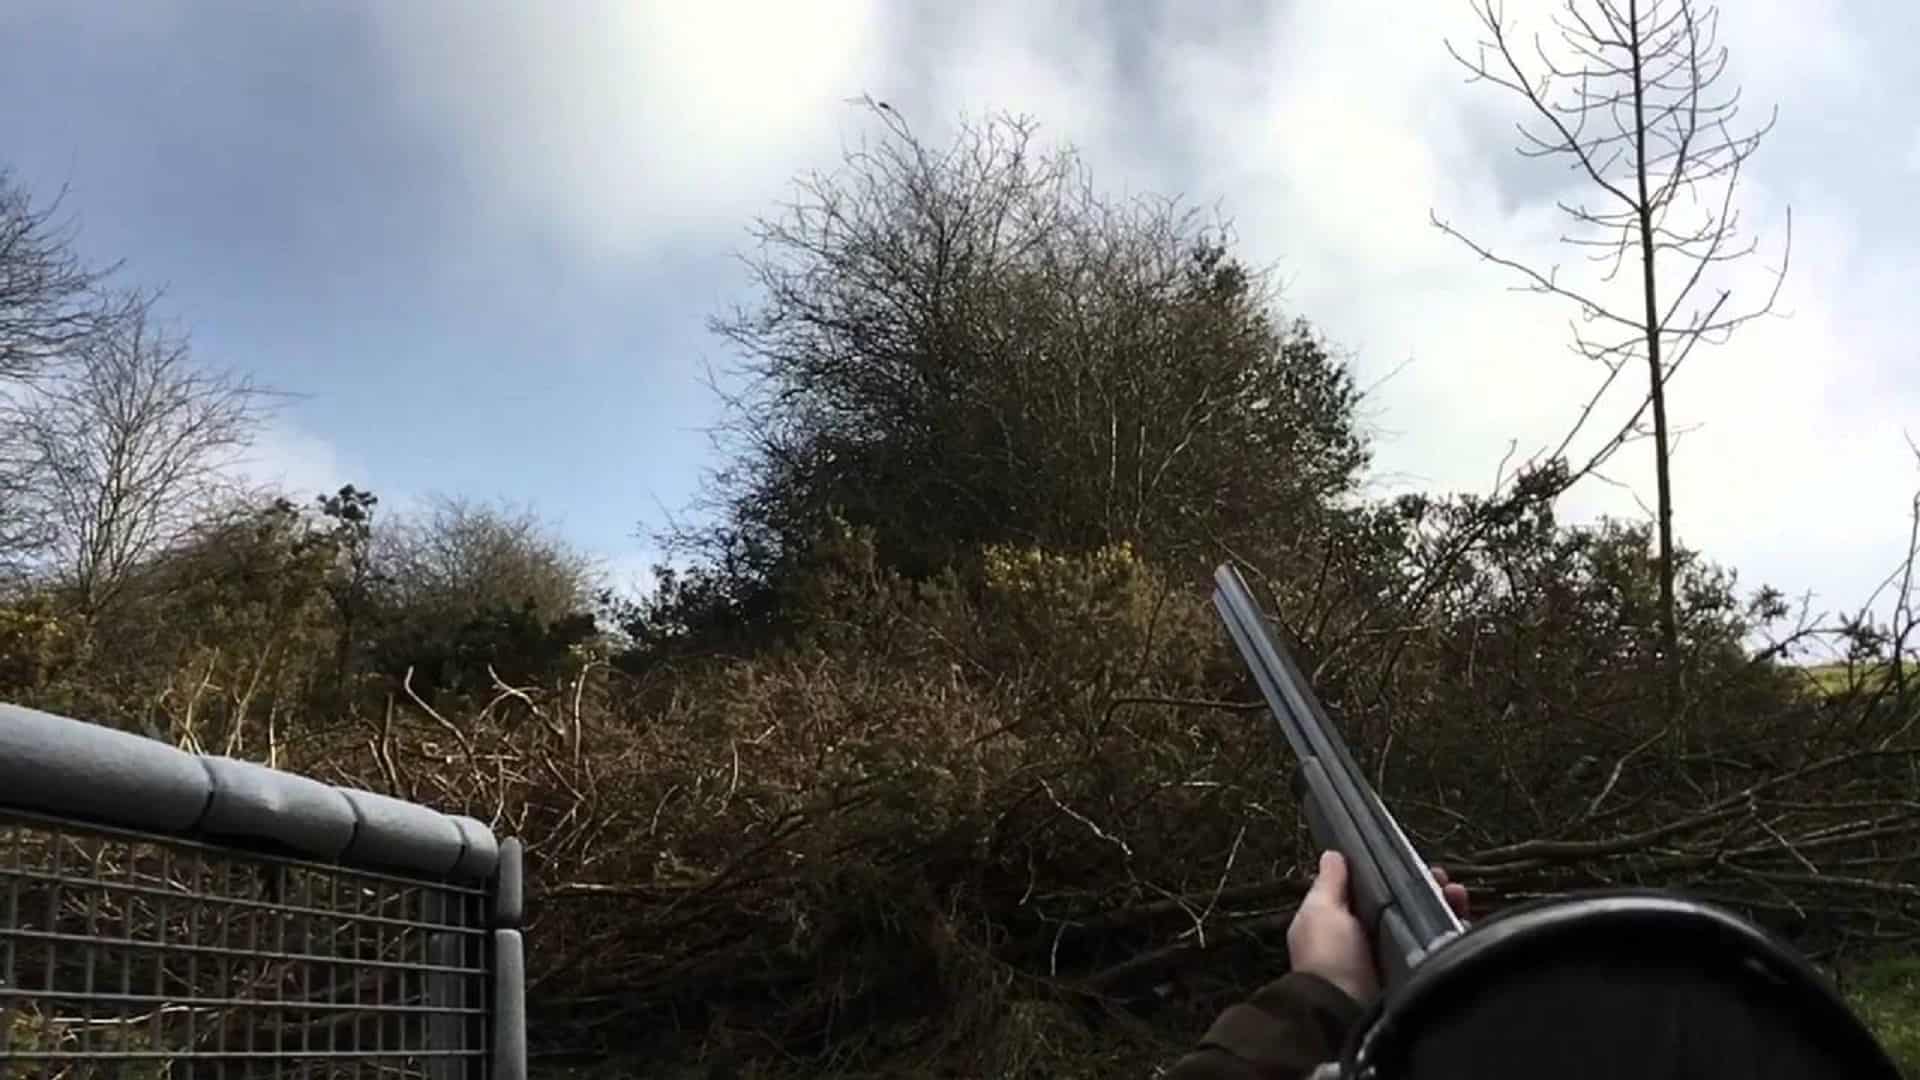 The Boar Clay Shooting Ground in UK